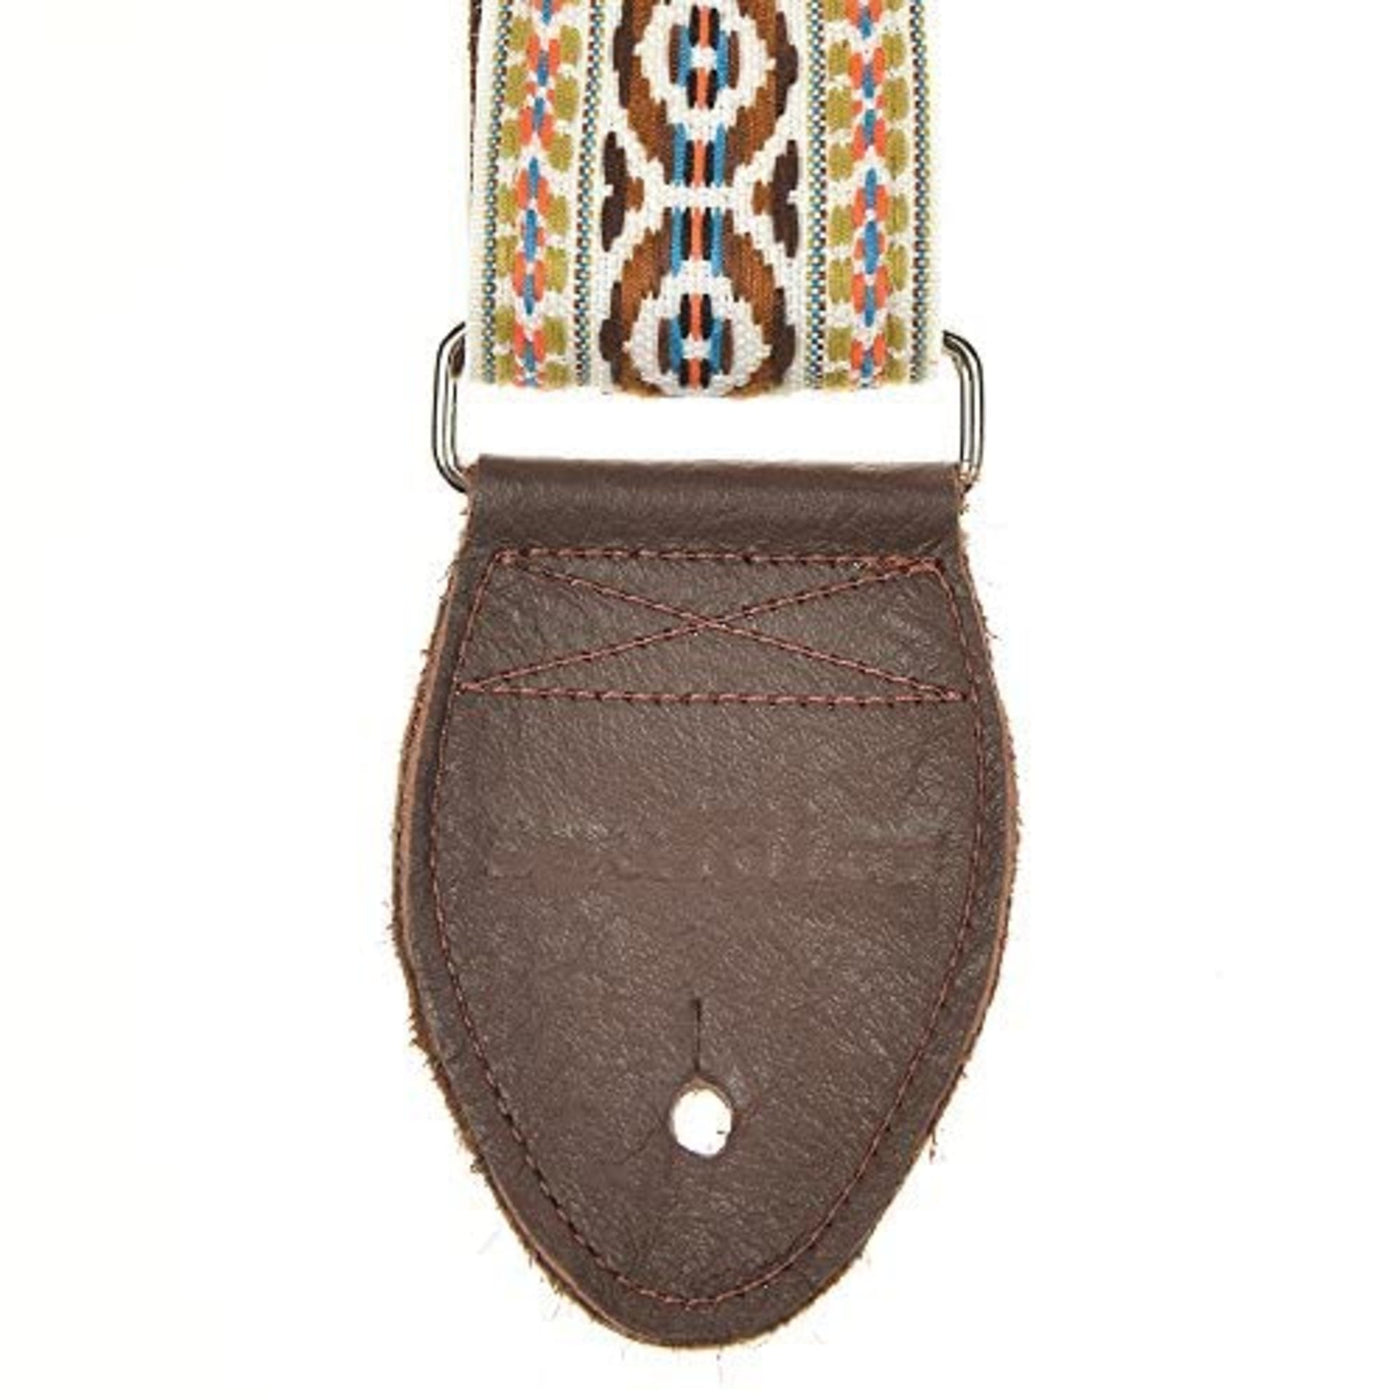 Souldier GS0127NM02WB - Handmade Seatbelt Guitar Strap for Bass, Electric or Acoustic Guitar, 2 Inches Wide and Adjustable Length from 30" to 63"  Made in the USA, Bohemian, Natural